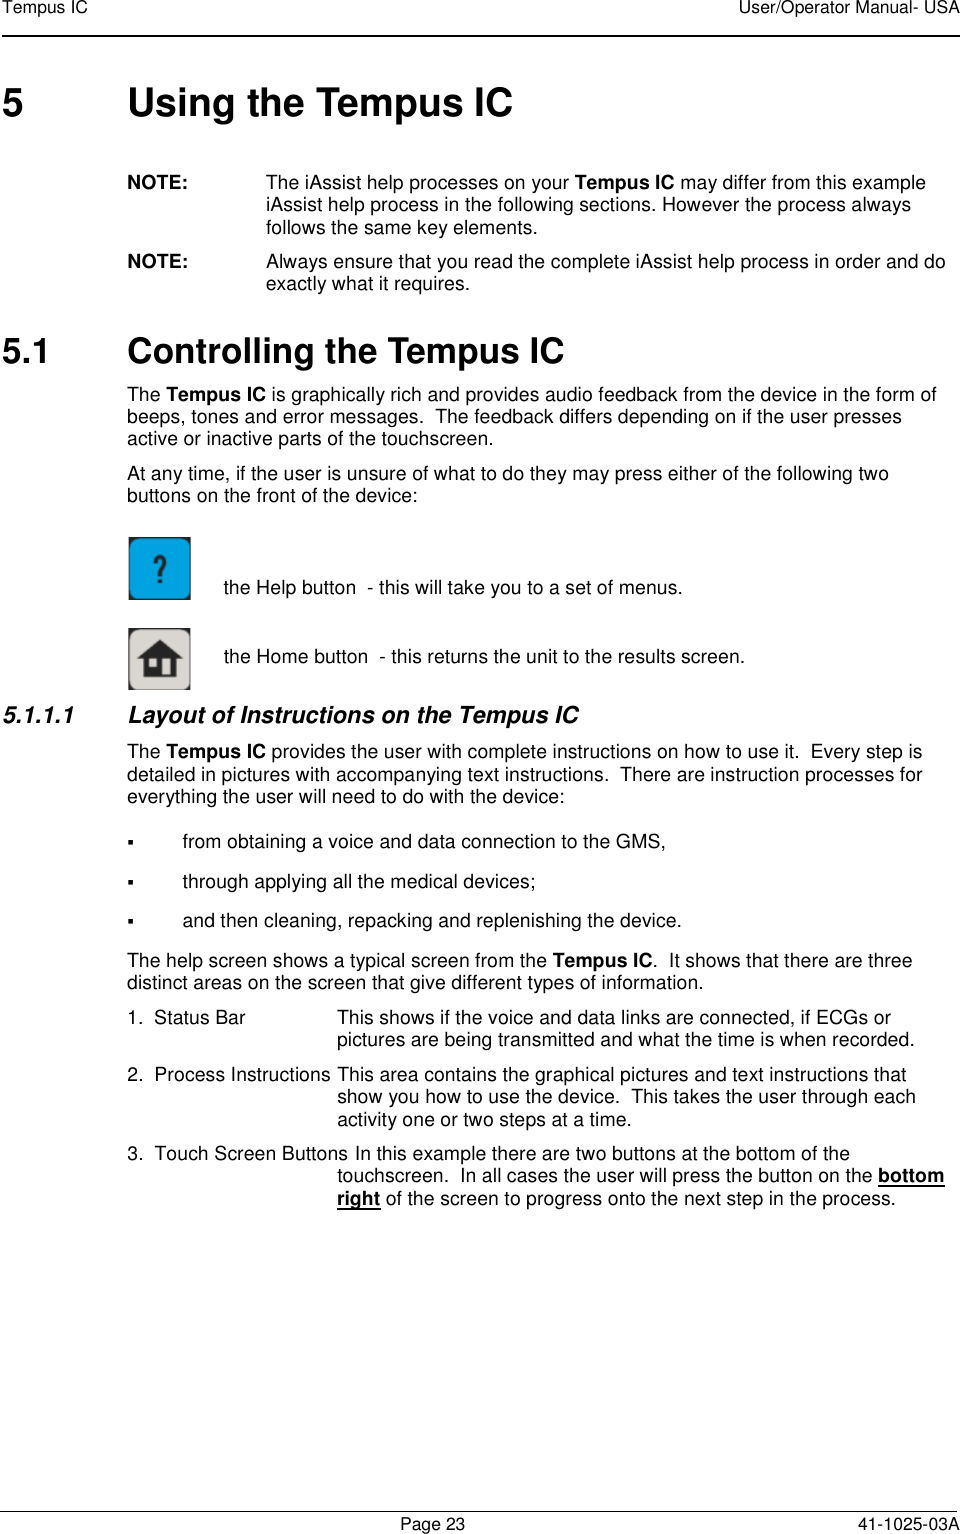 Tempus IC    User/Operator Manual- USA        Page 23  41-1025-03A 5  Using the Tempus IC  NOTE:  The iAssist help processes on your Tempus IC may differ from this example iAssist help process in the following sections. However the process always follows the same key elements.   NOTE:  Always ensure that you read the complete iAssist help process in order and do exactly what it requires.  5.1  Controlling the Tempus IC The Tempus IC is graphically rich and provides audio feedback from the device in the form of beeps, tones and error messages.  The feedback differs depending on if the user presses active or inactive parts of the touchscreen. At any time, if the user is unsure of what to do they may press either of the following two buttons on the front of the device:       the Help button  - this will take you to a set of menus.       the Home button  - this returns the unit to the results screen.   5.1.1.1  Layout of Instructions on the Tempus IC The Tempus IC provides the user with complete instructions on how to use it.  Every step is detailed in pictures with accompanying text instructions.  There are instruction processes for everything the user will need to do with the device:   from obtaining a voice and data connection to the GMS,   through applying all the medical devices;   and then cleaning, repacking and replenishing the device. The help screen shows a typical screen from the Tempus IC.  It shows that there are three distinct areas on the screen that give different types of information. 1.  Status Bar   This shows if the voice and data links are connected, if ECGs or pictures are being transmitted and what the time is when recorded. 2.  Process Instructions  This area contains the graphical pictures and text instructions that show you how to use the device.  This takes the user through each activity one or two steps at a time. 3.  Touch Screen Buttons  In this example there are two buttons at the bottom of the touchscreen.  In all cases the user will press the button on the bottom right of the screen to progress onto the next step in the process.       